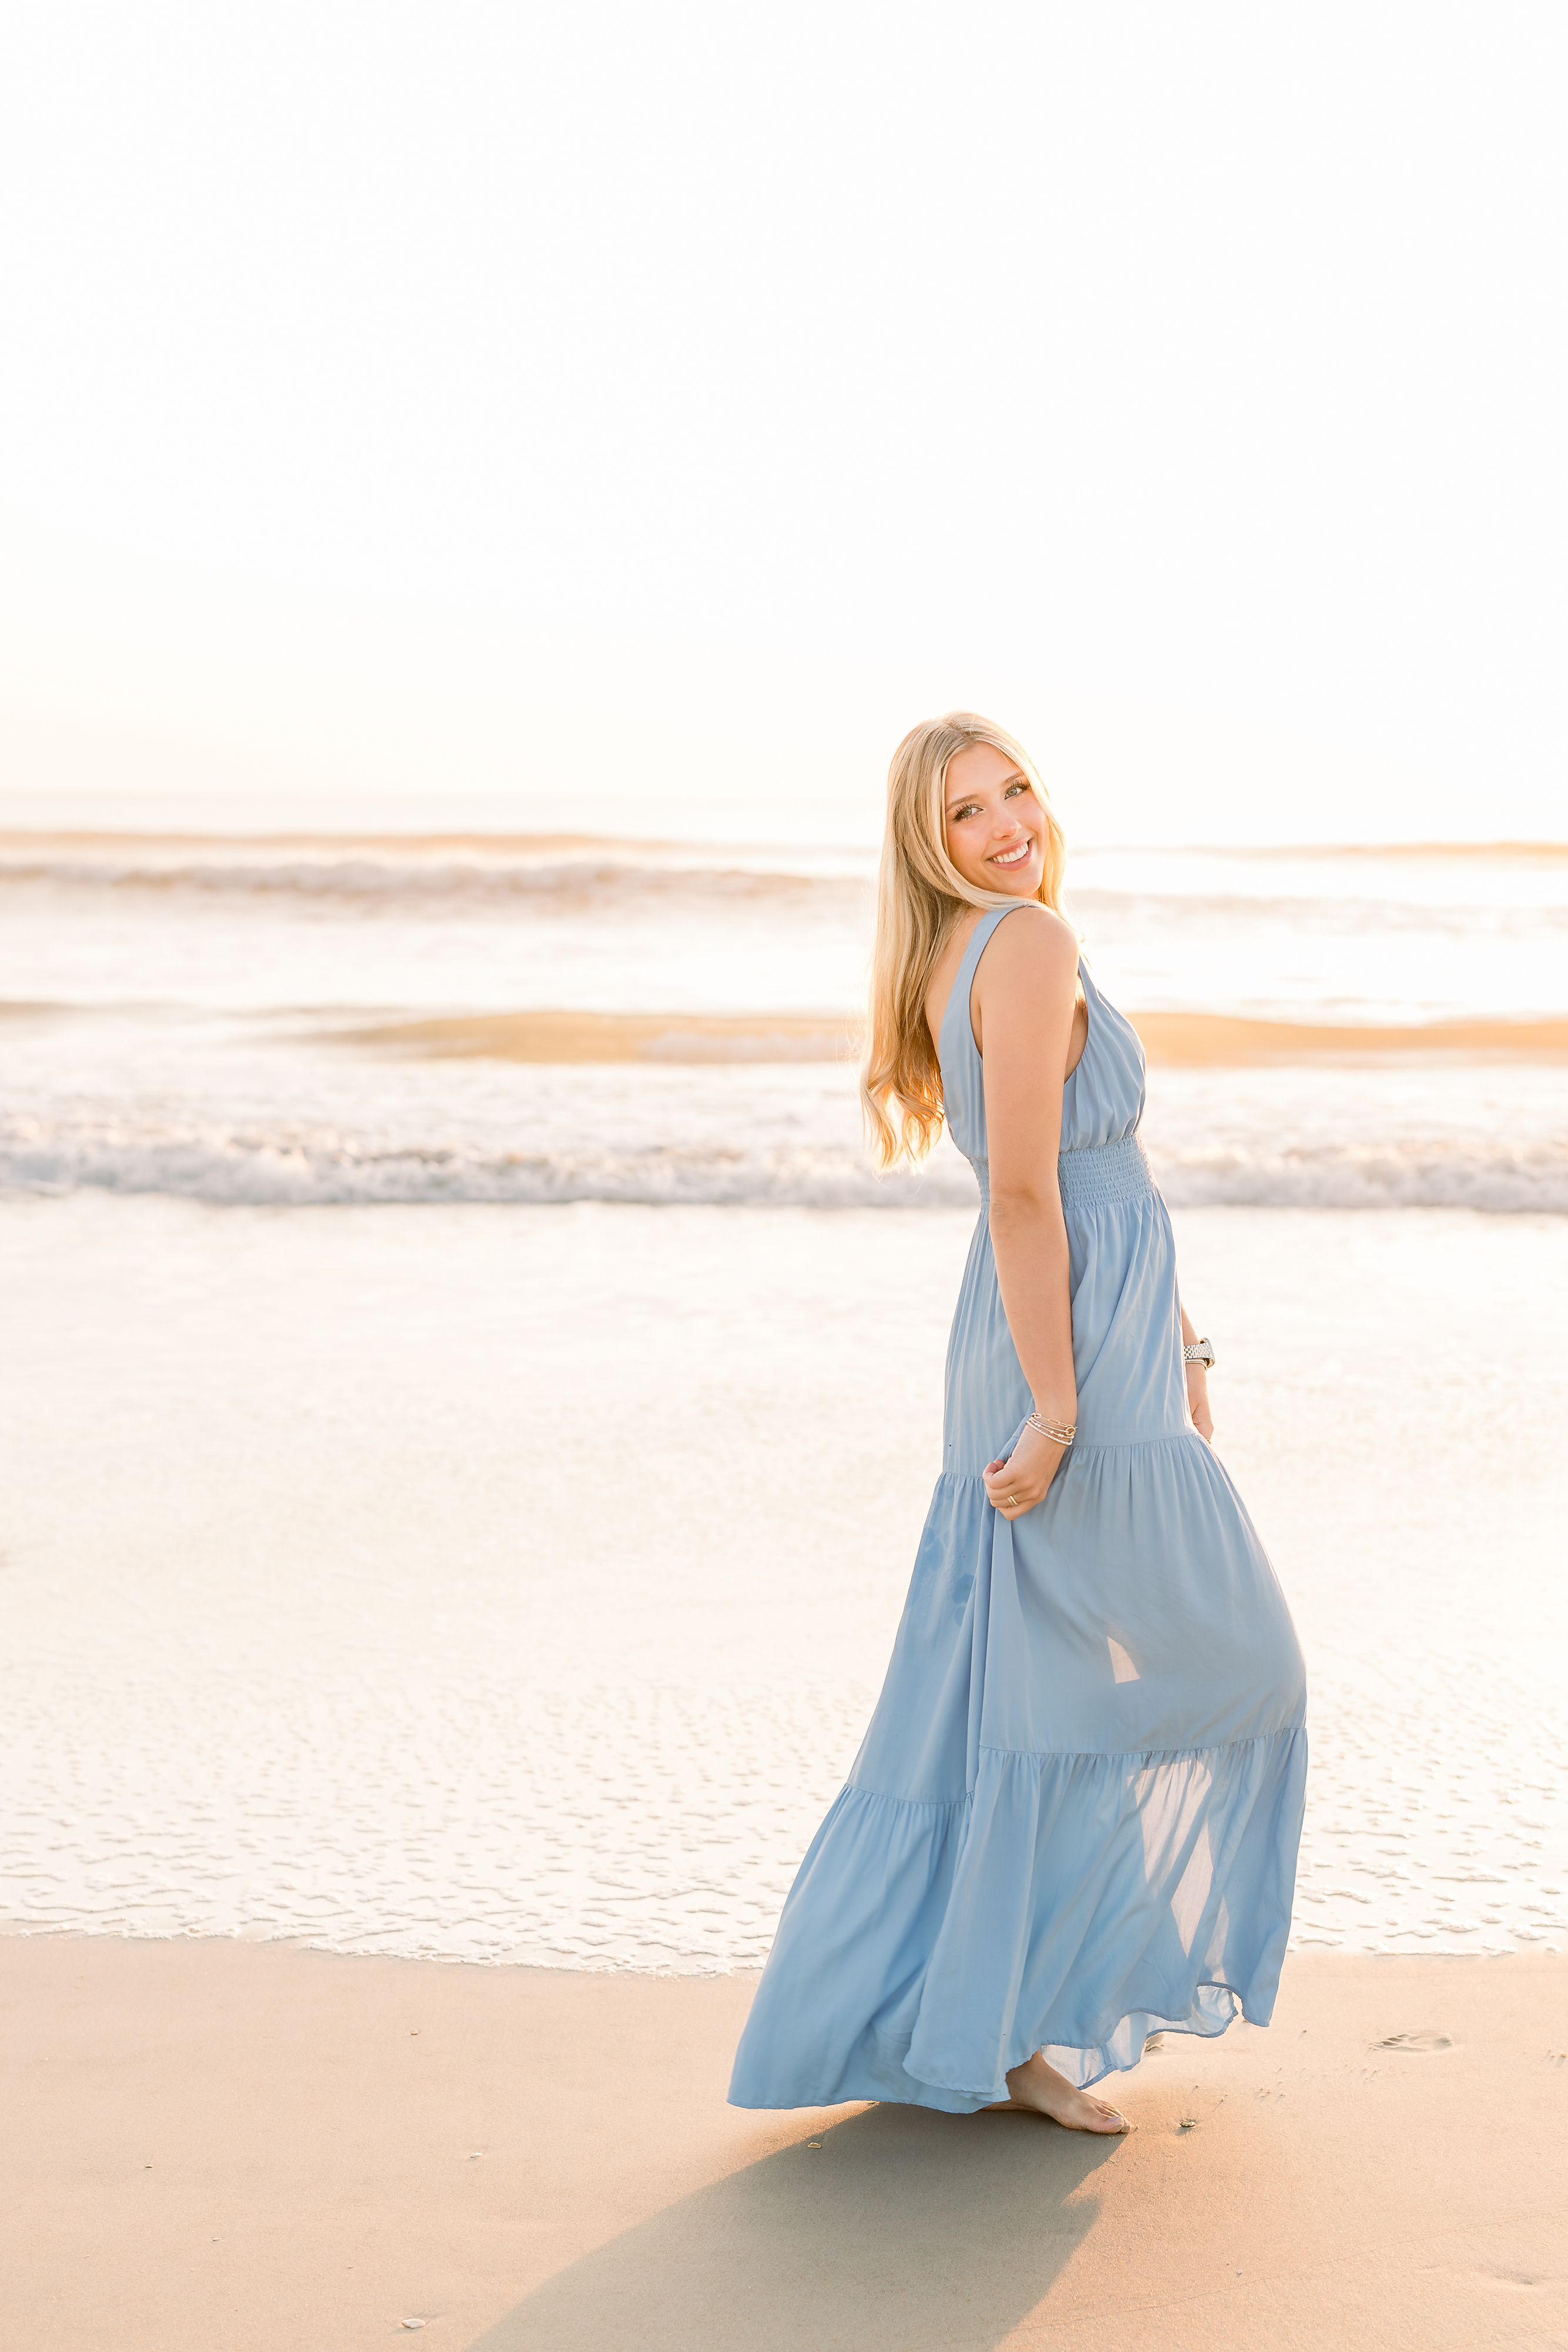 A light and airy sunrise portrait of a grad in a blue dress on St. Augustine Beach.